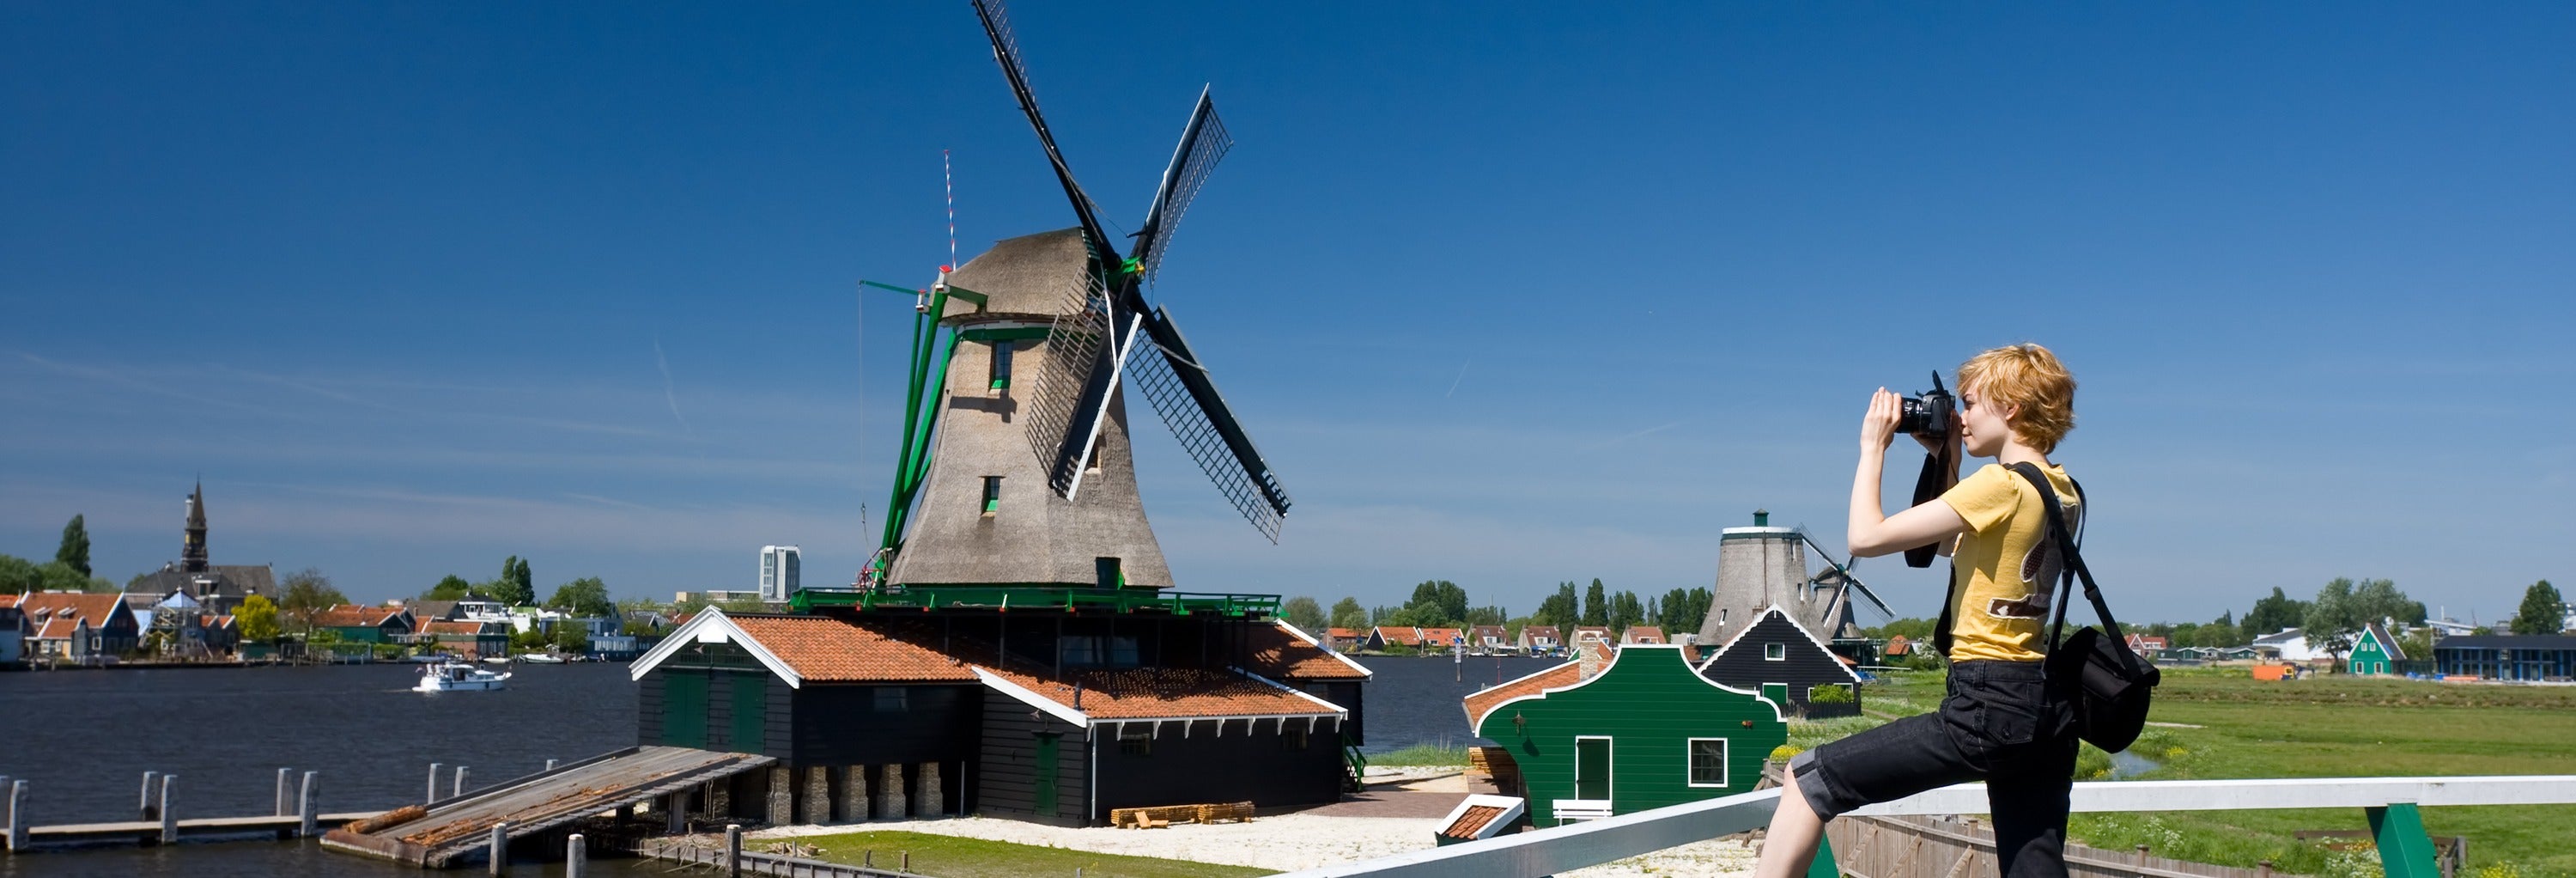 Private Day Trips from Amsterdam